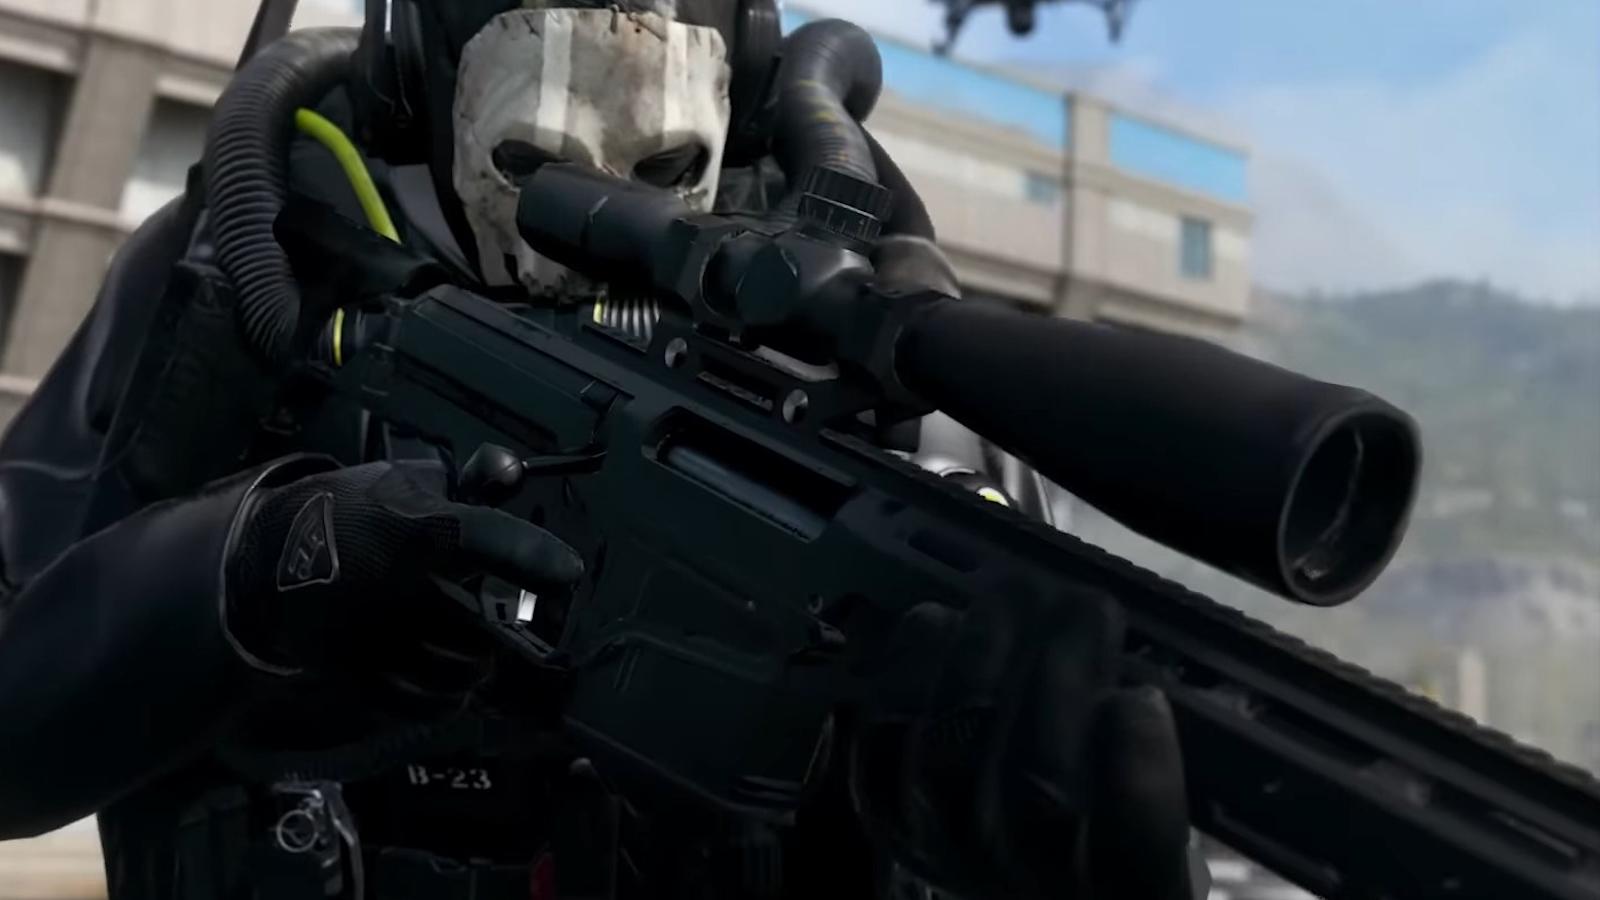 Ghost in Warzone aiming in with MCPR-300 sniper rifle.